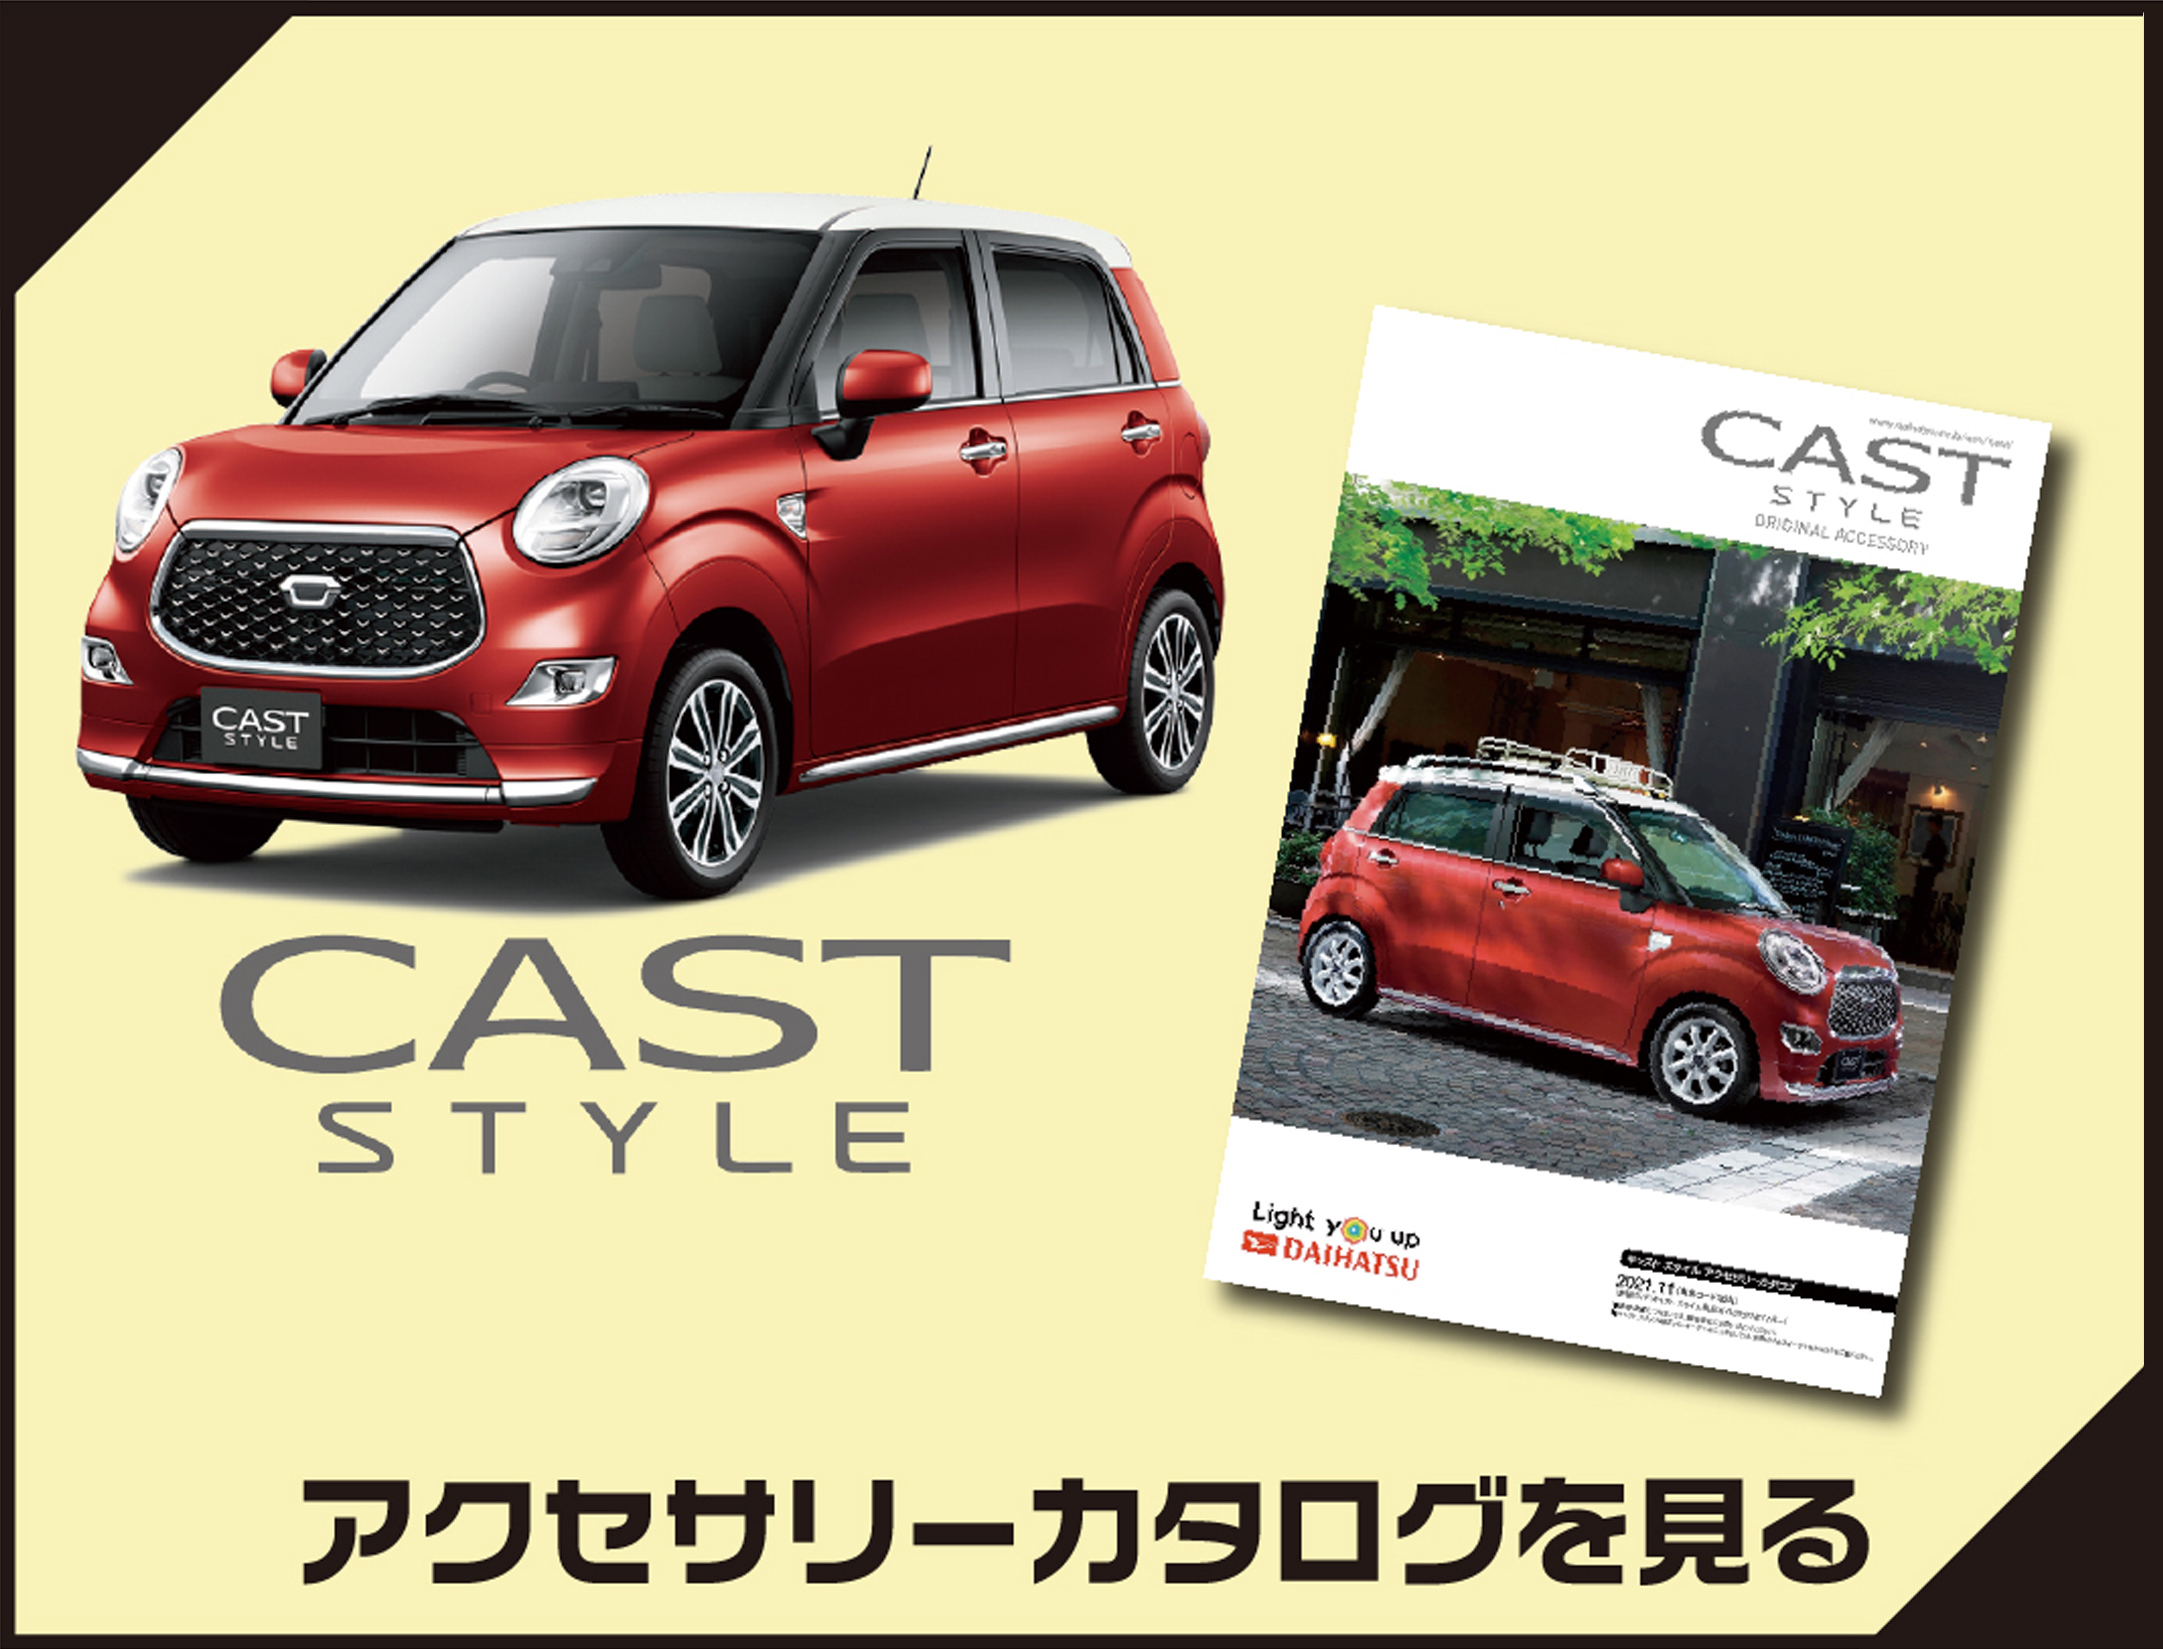 caststyle